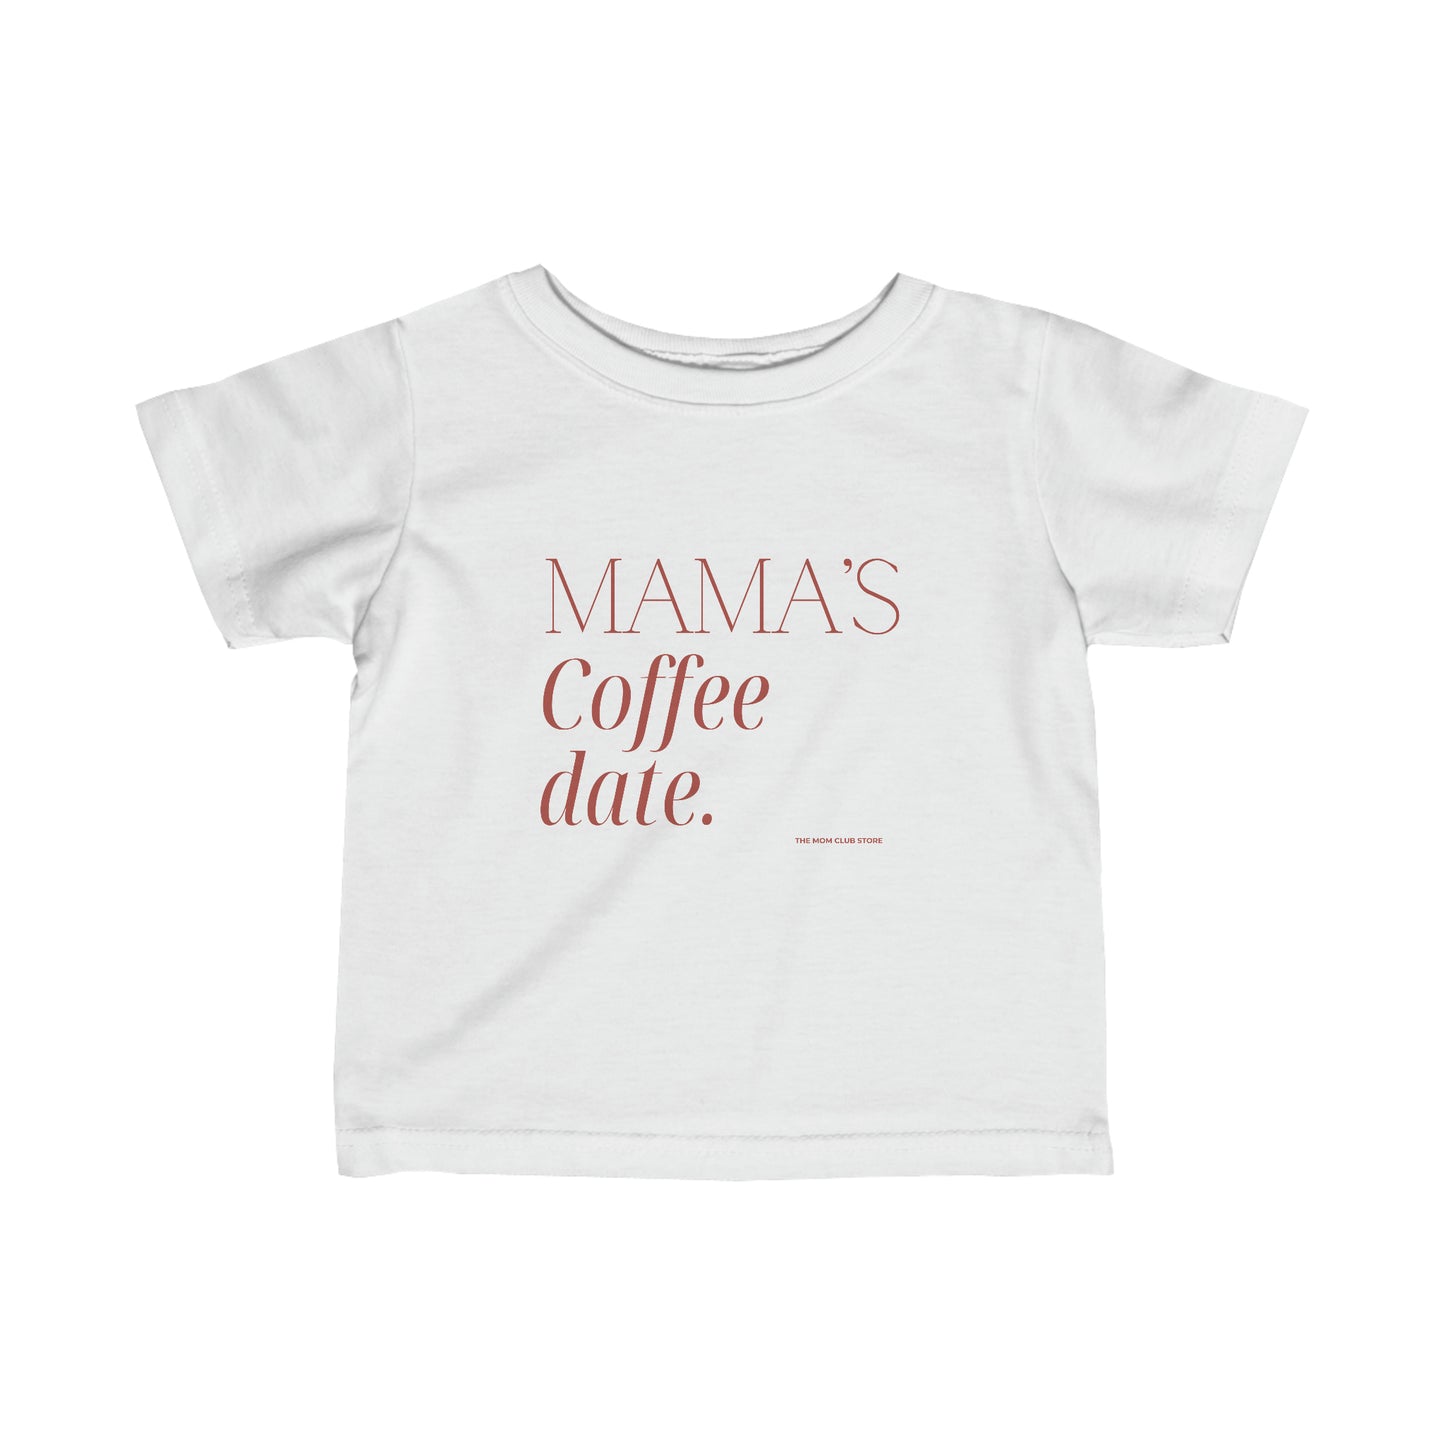 MAMA'S coffee date unisex print short-sleeved t-shirt for 6m-24m